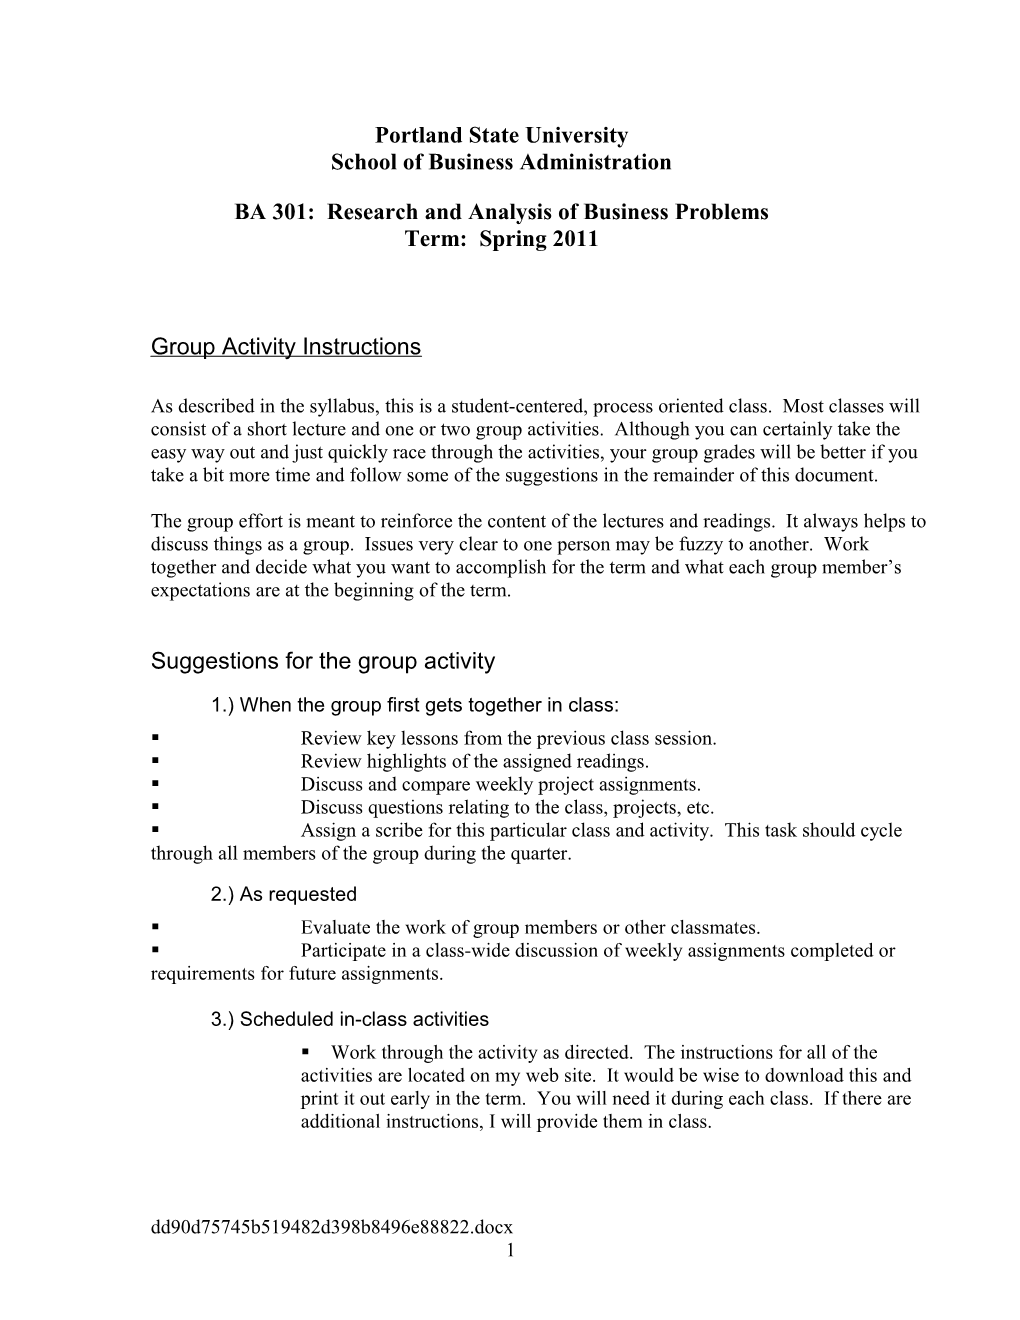 Group Activity Instructions